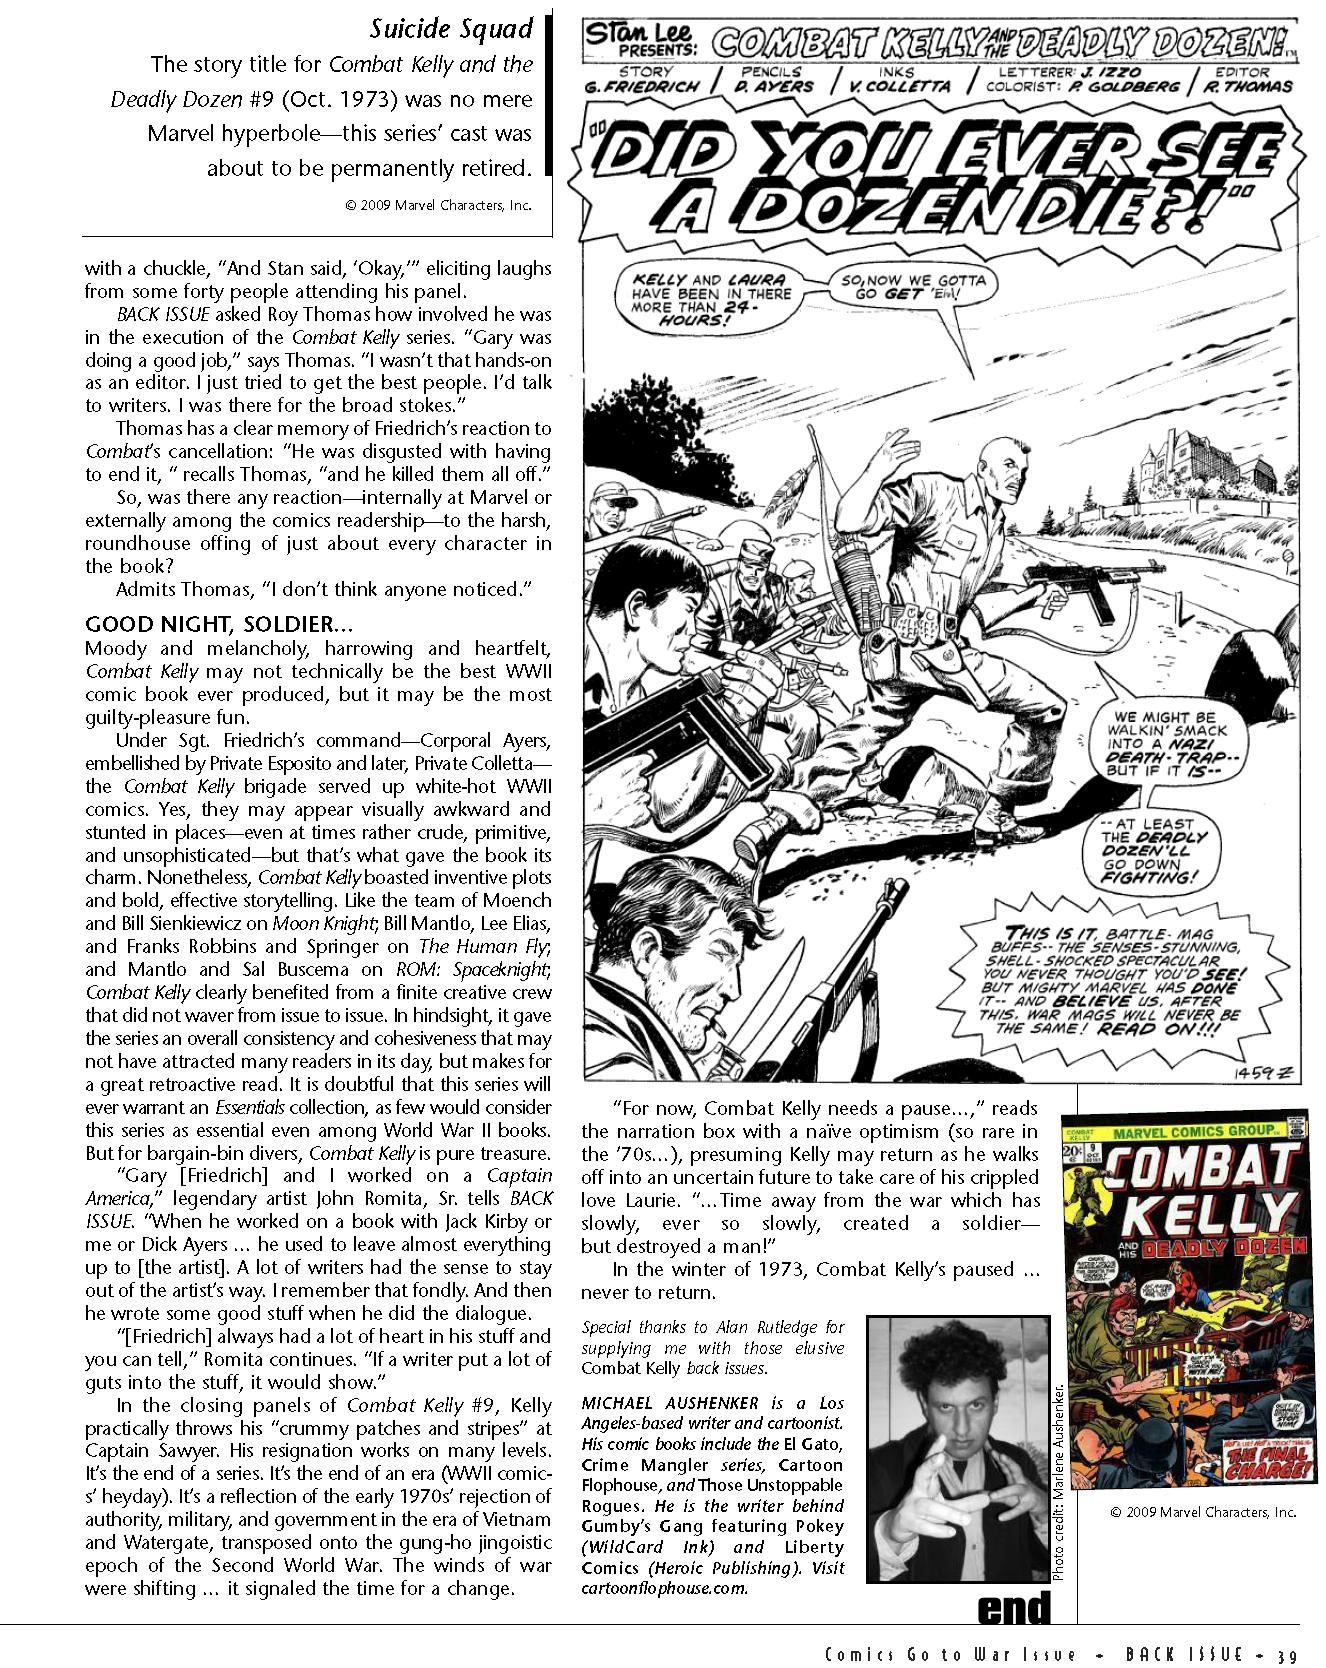 Read online Back Issue comic -  Issue #37 - 41